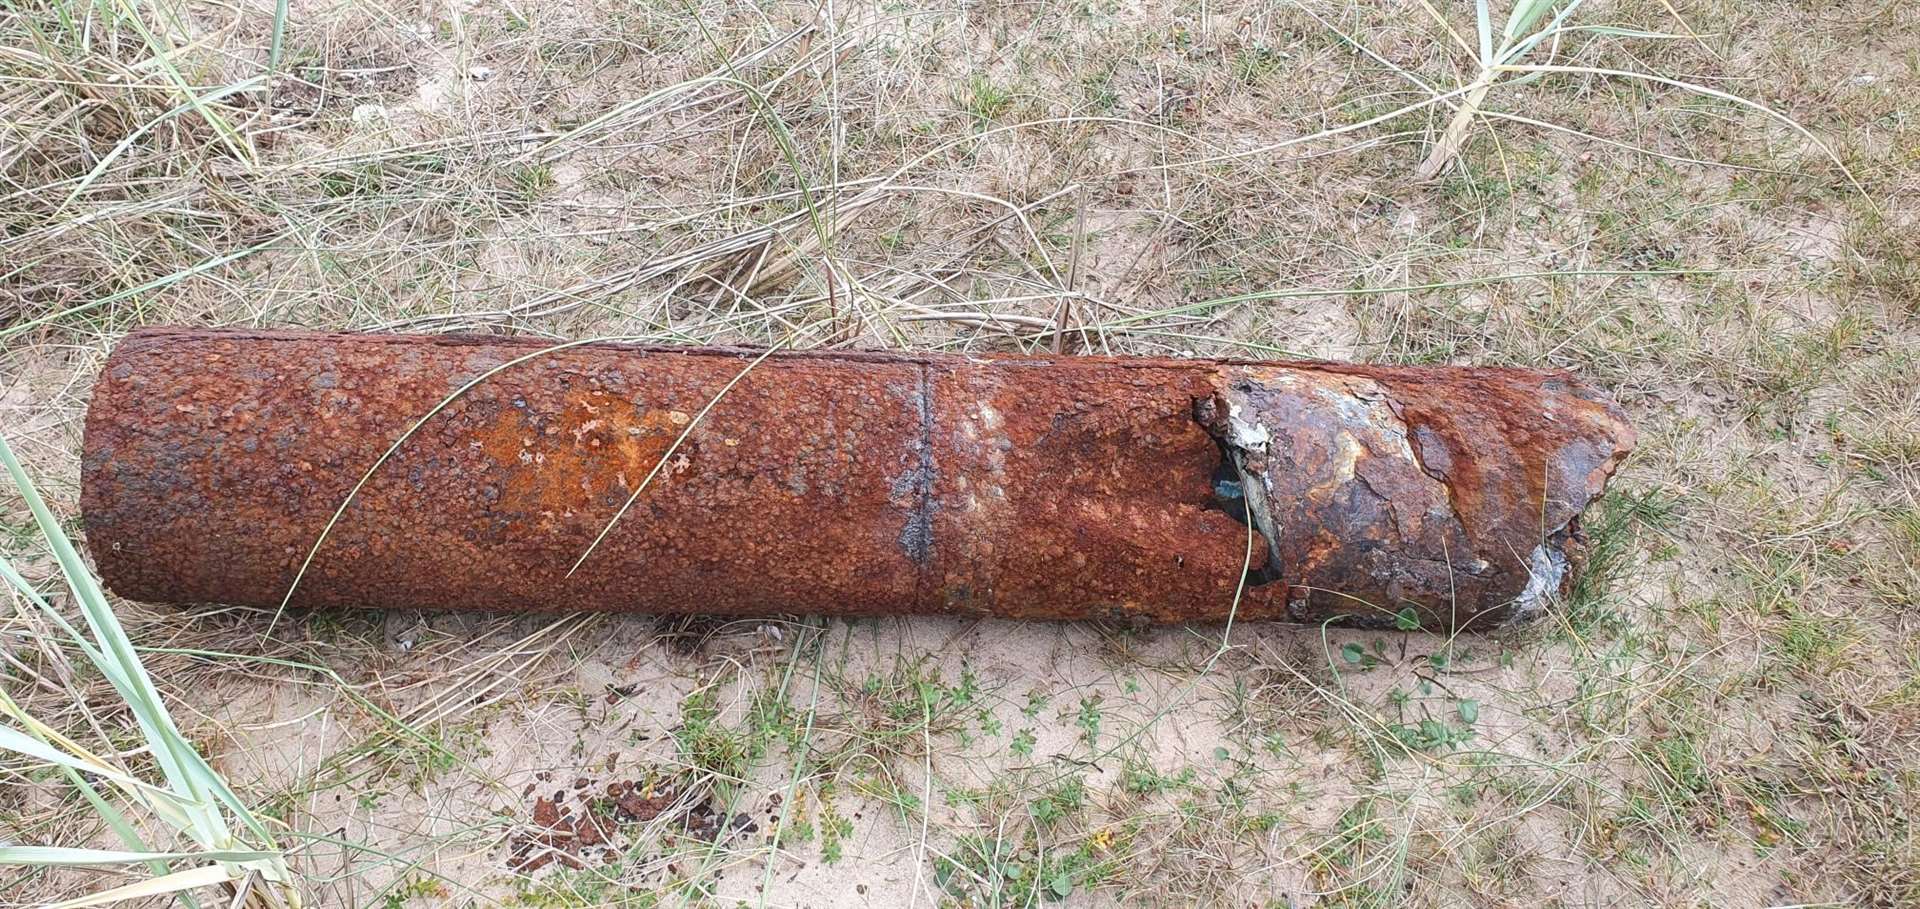 Laura Walsh's pic of the suspected unexploded wartime ordnance found at Culbin Forest north-east of Nairn